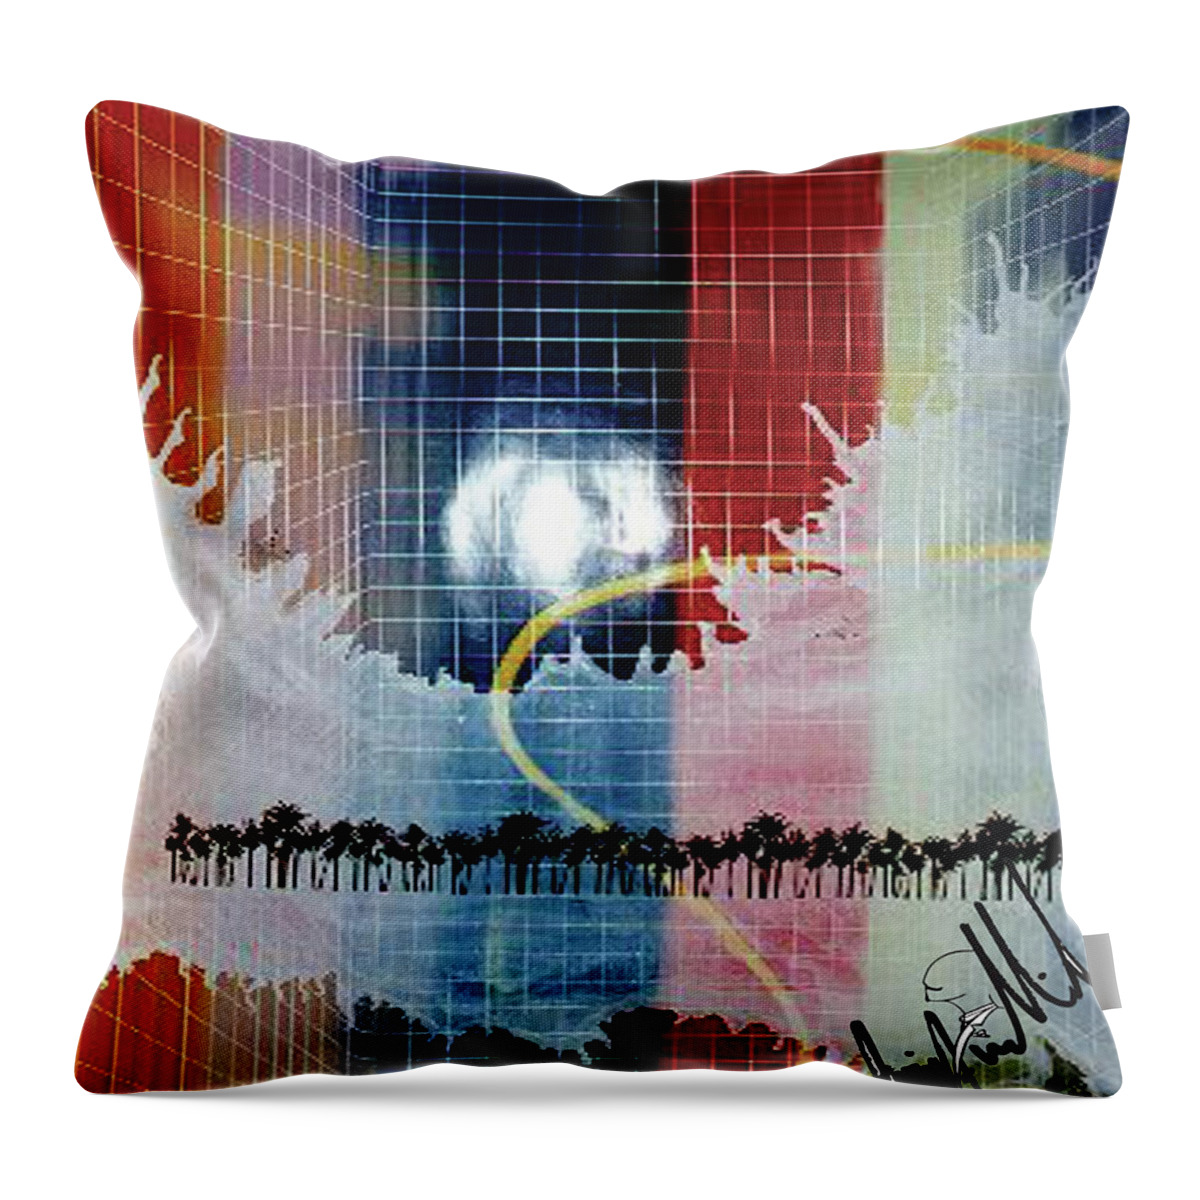  Throw Pillow featuring the digital art Palm Trees #1 by Jimmy Williams